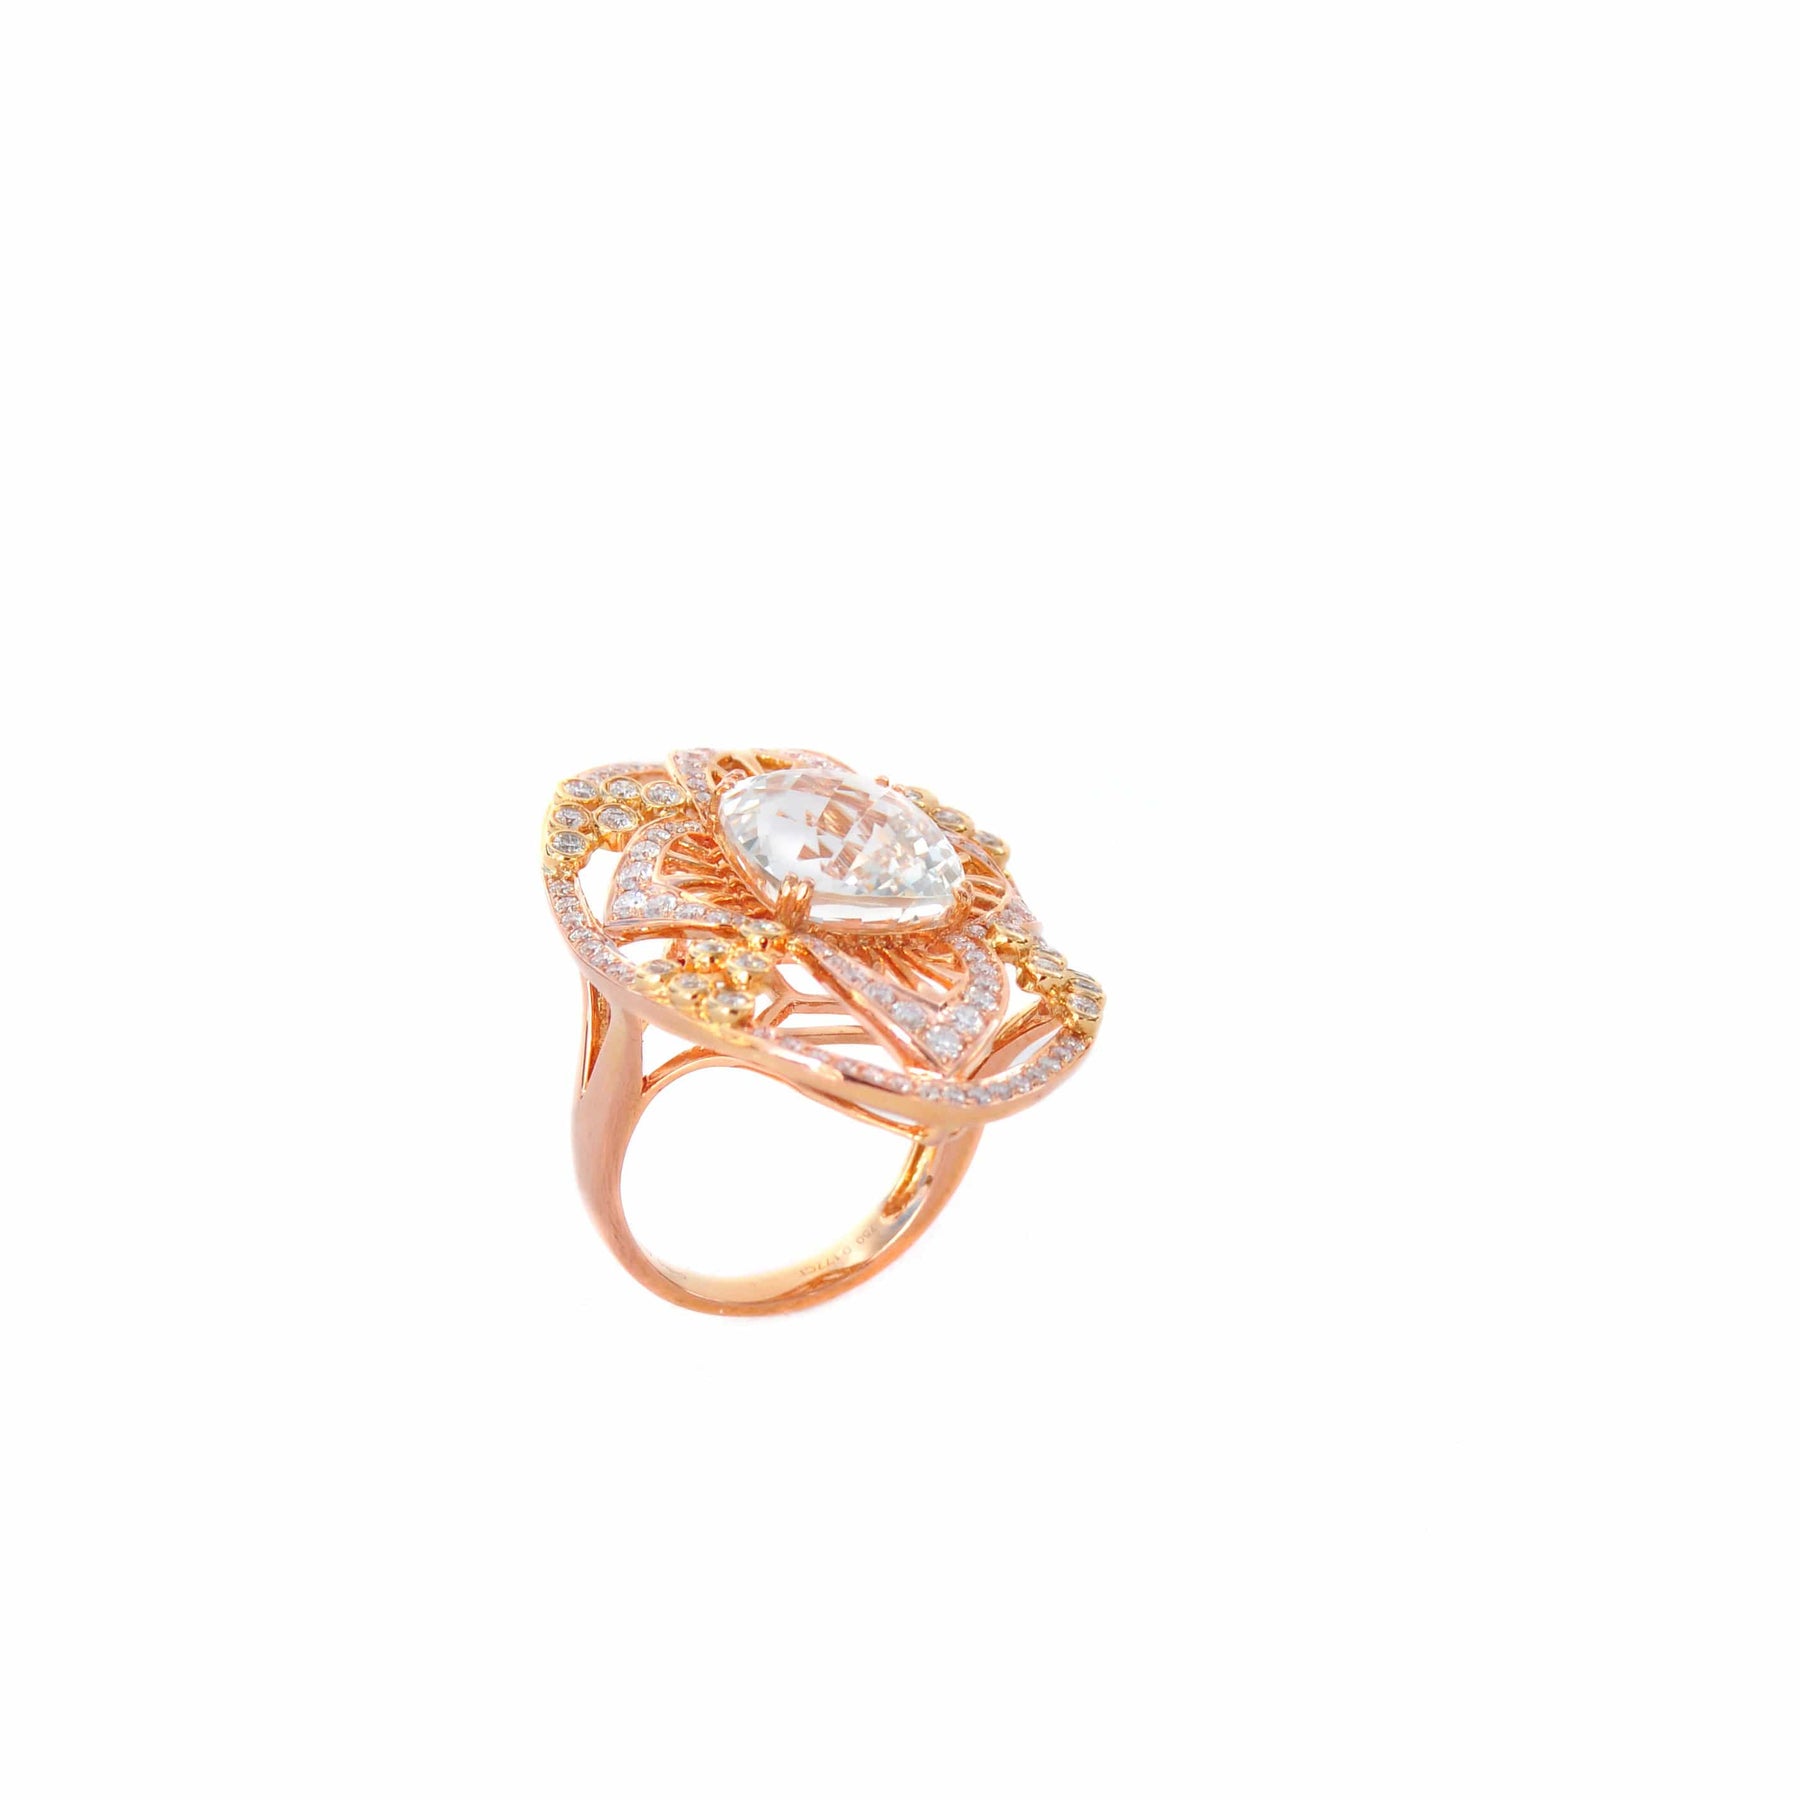 WHITE TOPAZ RING - CROWN JEWEL - Chris Aire Fine Jewelry & Timepieces